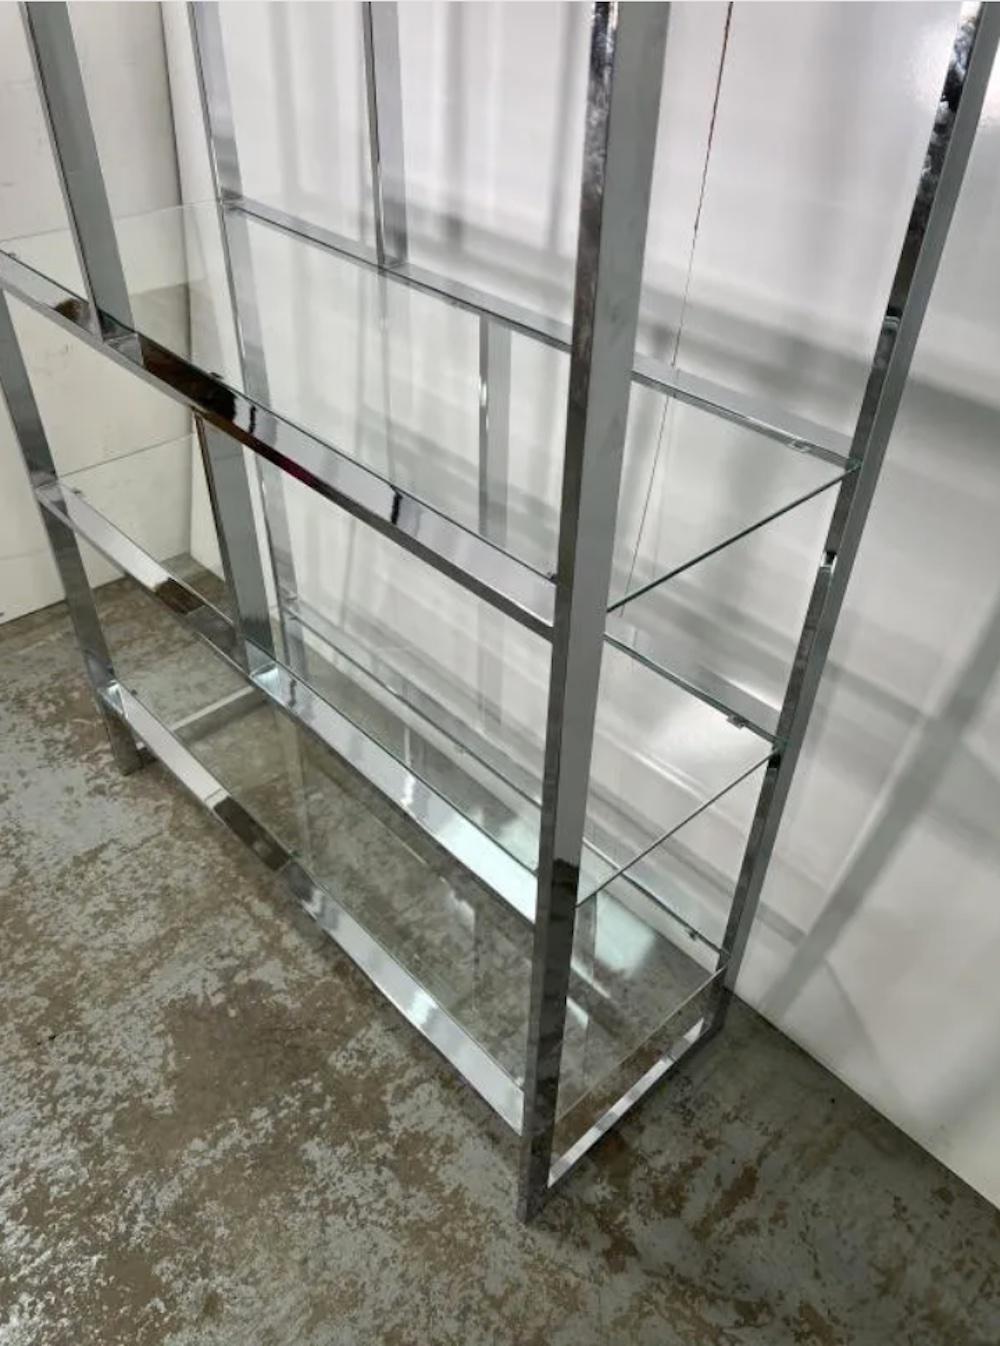 American Mid-Century Modern in the Style of Milo Baughman Chrome & Glass Shelf Etagere For Sale